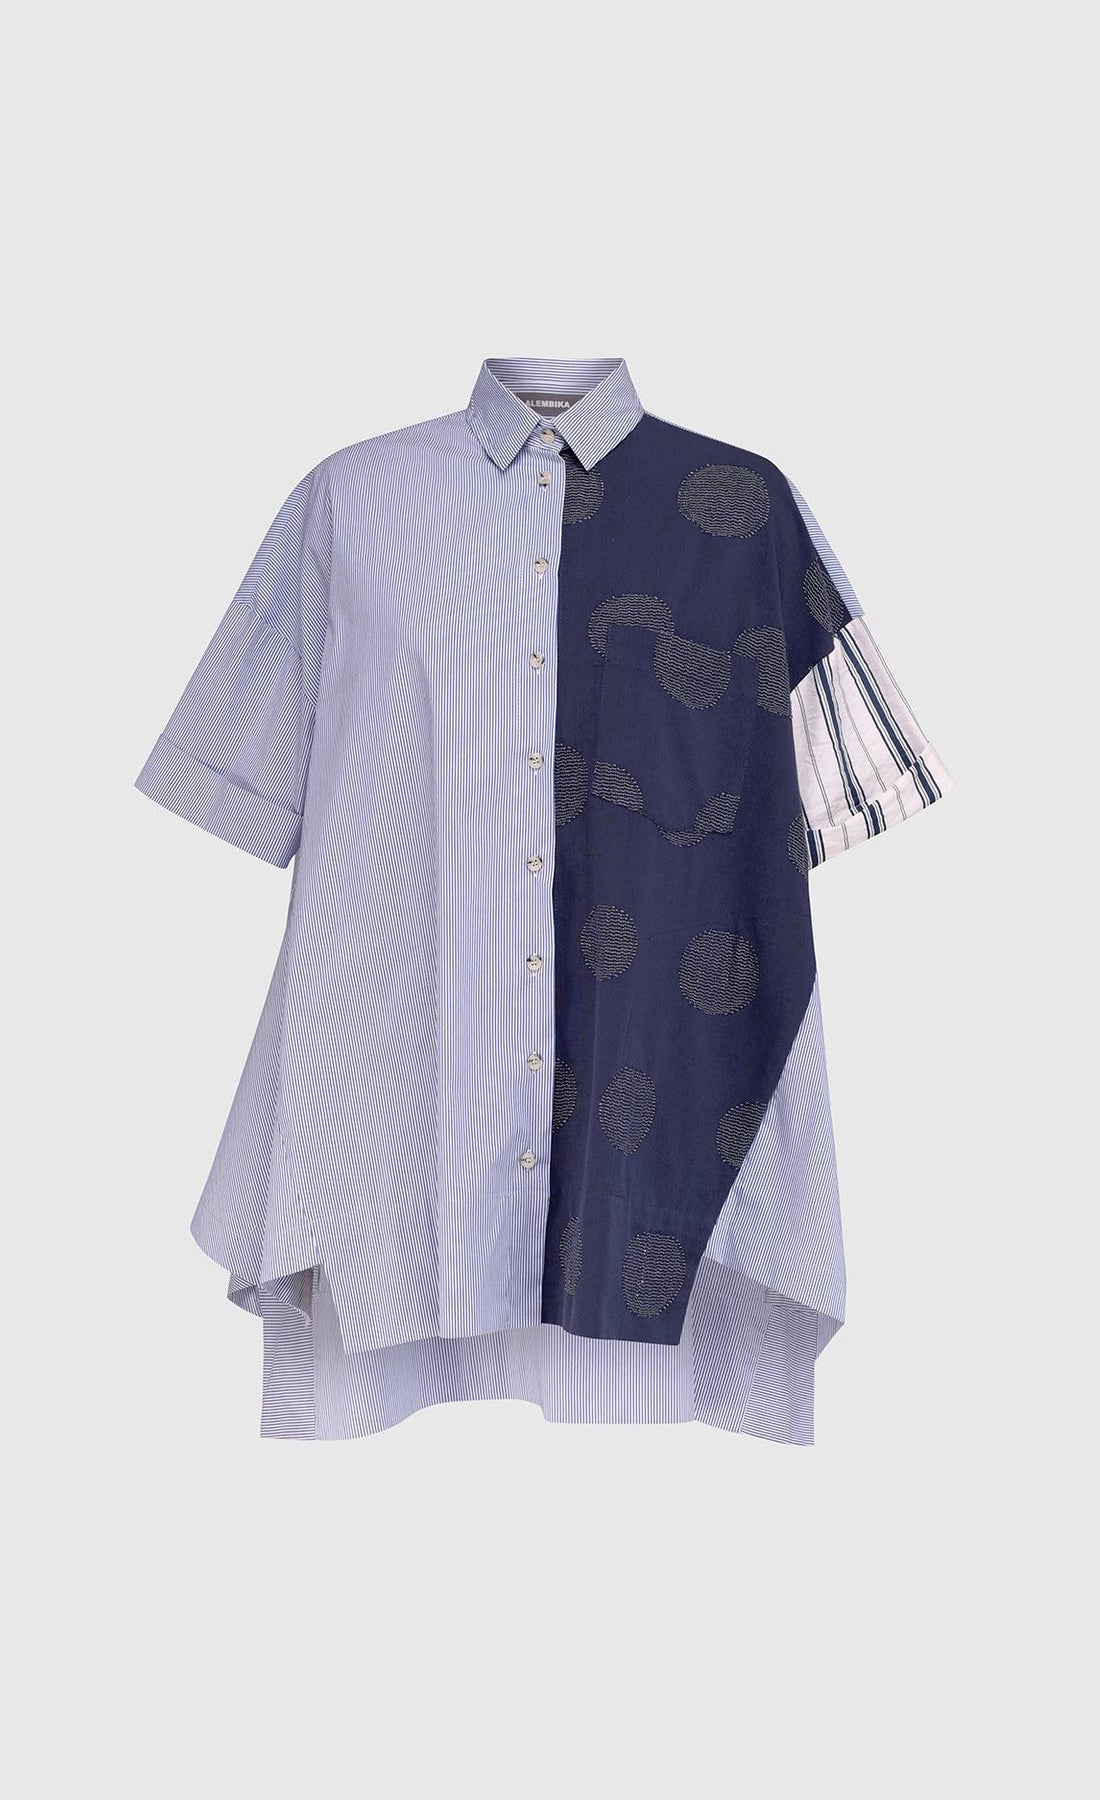 Front view of the alembika navy short sleeve shirt. This shirt has blue and white stripes on the front right side and blue with green dots on the left side.